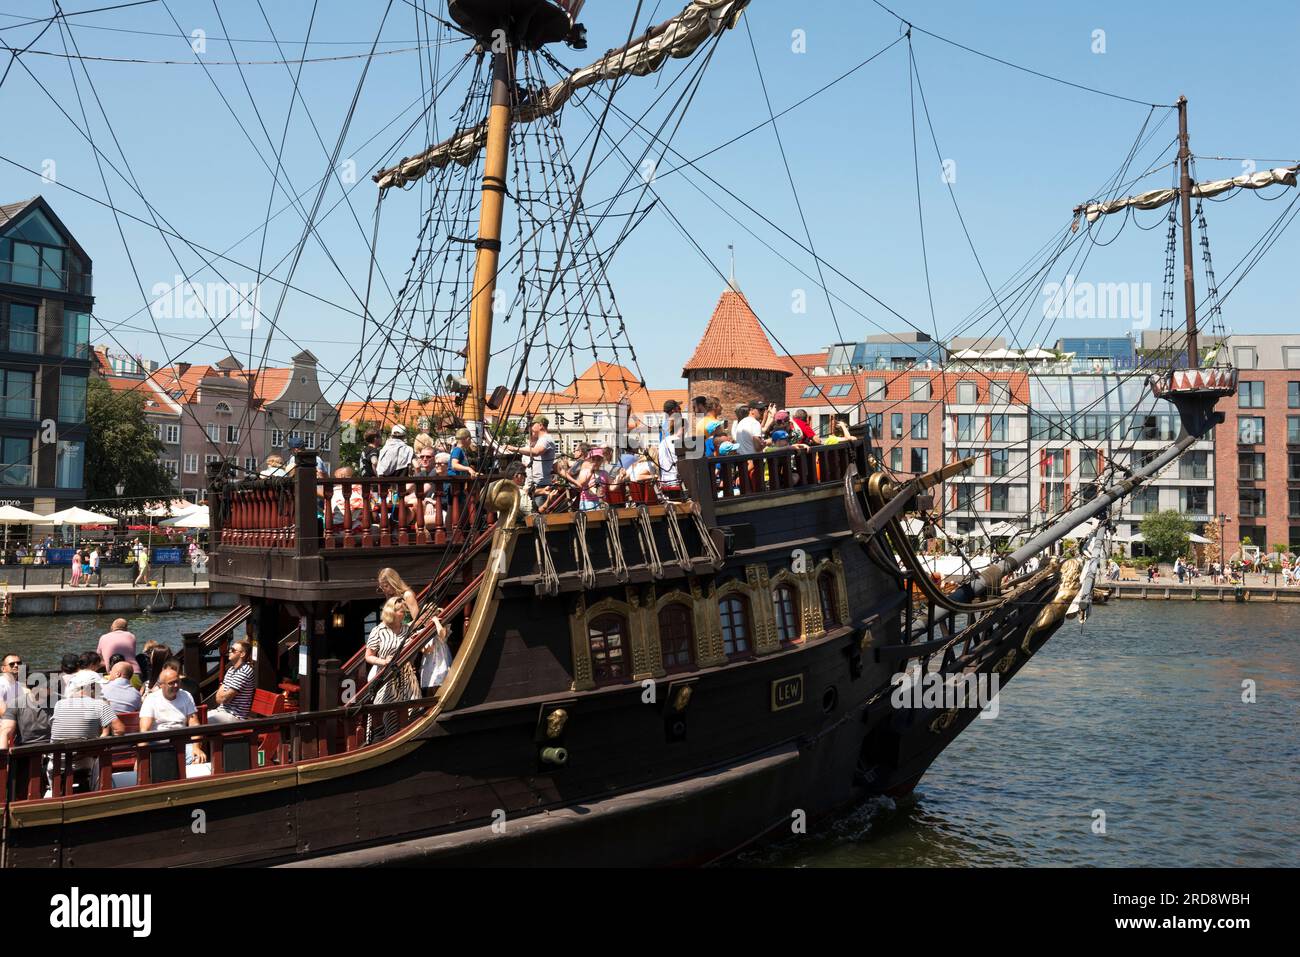 Tourists on board of the Lew pirate river cruise galleon ship on Motlawa River in the Old Town of Gdansk, Poland Stock Photo